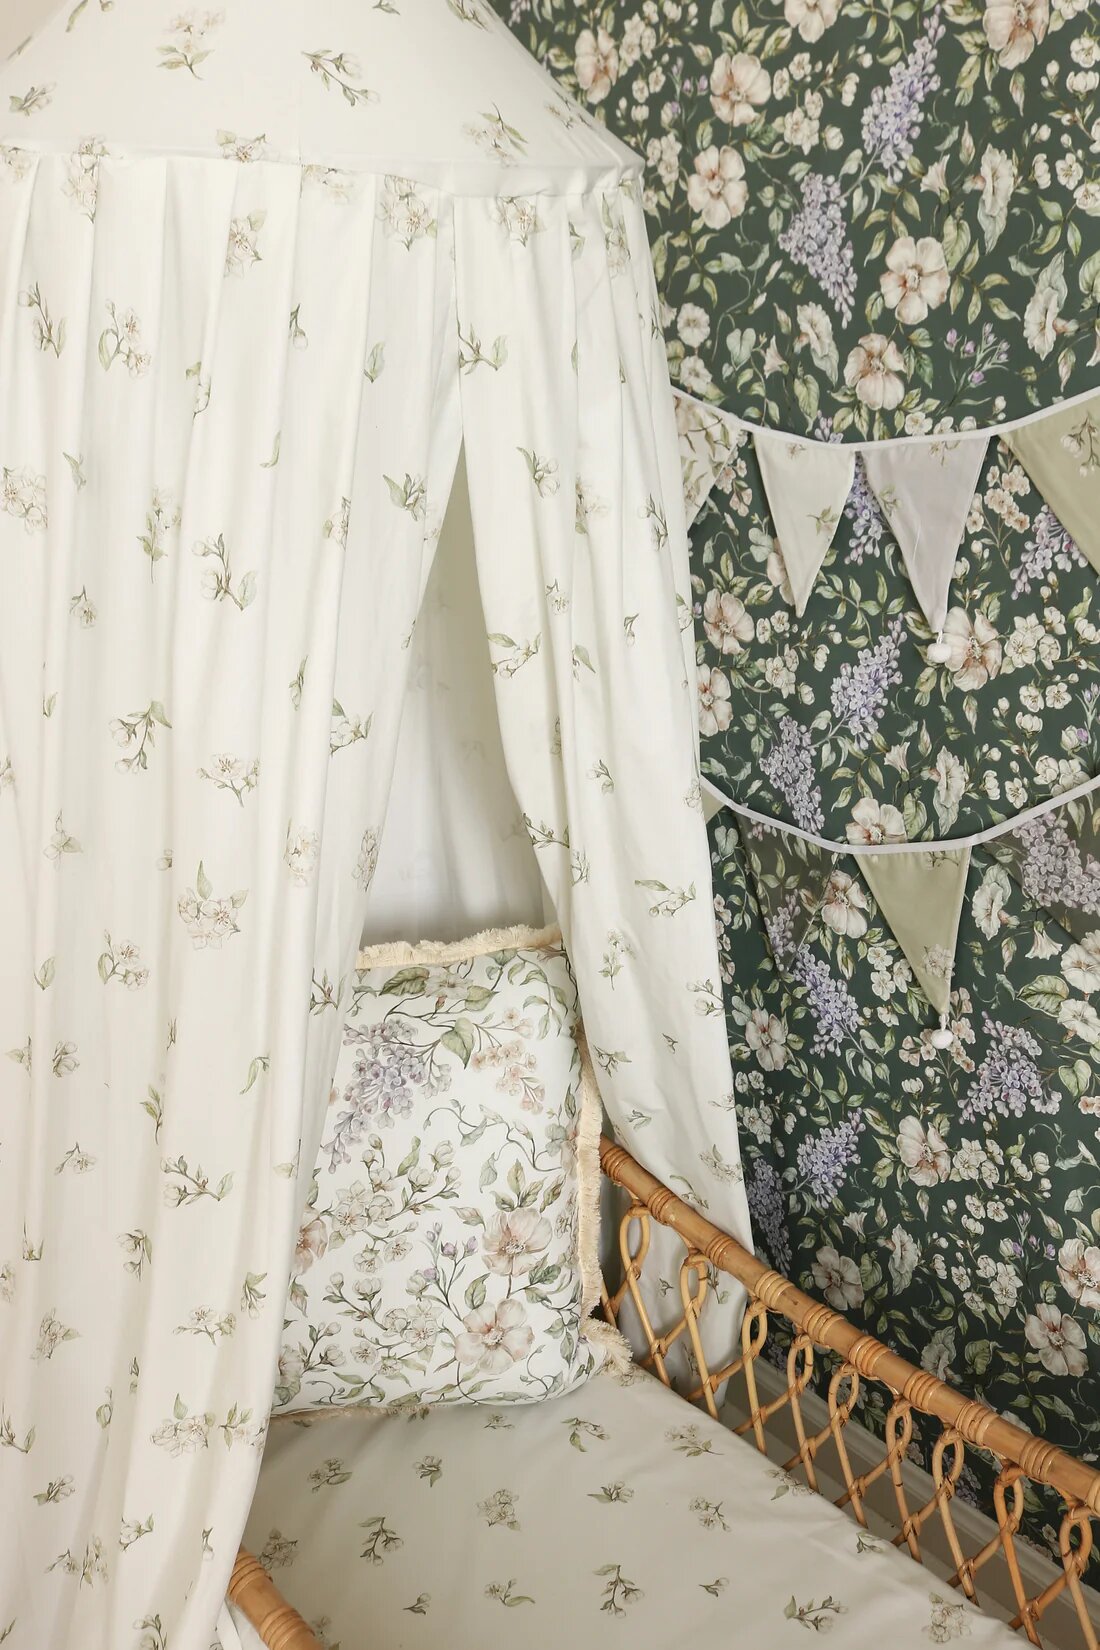 Matuu Bed canopy, Apple Blossom, 3 different colors